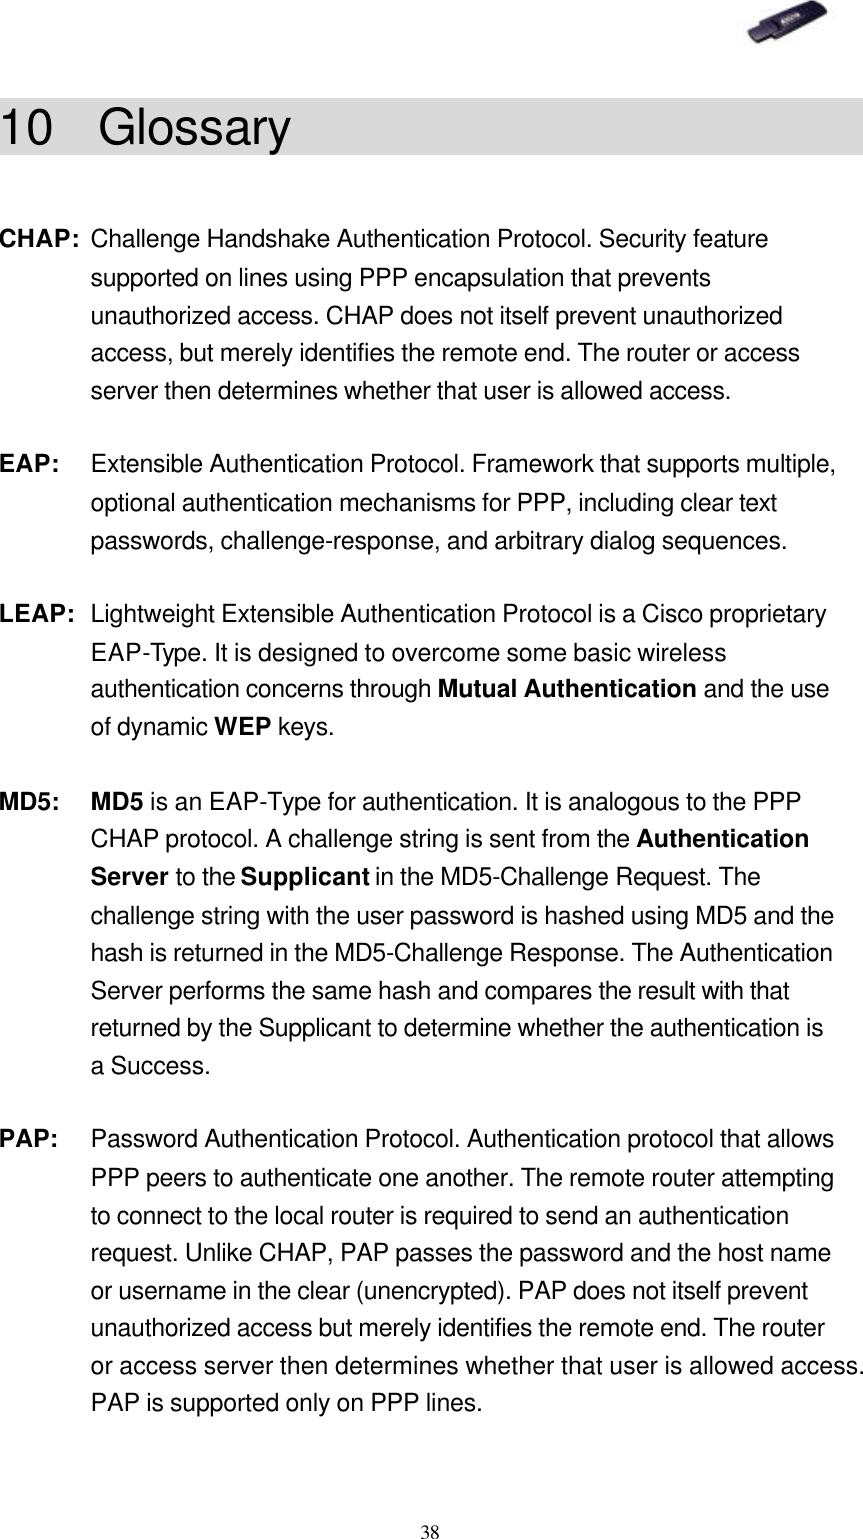   38 10 Glossary                         CHAP: Challenge Handshake Authentication Protocol. Security feature supported on lines using PPP encapsulation that prevents unauthorized access. CHAP does not itself prevent unauthorized access, but merely identifies the remote end. The router or access server then determines whether that user is allowed access. EAP: Extensible Authentication Protocol. Framework that supports multiple, optional authentication mechanisms for PPP, including clear text passwords, challenge-response, and arbitrary dialog sequences. LEAP: Lightweight Extensible Authentication Protocol is a Cisco proprietary EAP-Type. It is designed to overcome some basic wireless authentication concerns through Mutual Authentication and the use of dynamic WEP keys. MD5: MD5 is an EAP-Type for authentication. It is analogous to the PPP CHAP protocol. A challenge string is sent from the Authentication Server to the Supplicant in the MD5-Challenge Request. The challenge string with the user password is hashed using MD5 and the hash is returned in the MD5-Challenge Response. The Authentication Server performs the same hash and compares the result with that returned by the Supplicant to determine whether the authentication is a Success. PAP: Password Authentication Protocol. Authentication protocol that allows PPP peers to authenticate one another. The remote router attempting to connect to the local router is required to send an authentication request. Unlike CHAP, PAP passes the password and the host name or username in the clear (unencrypted). PAP does not itself prevent unauthorized access but merely identifies the remote end. The router or access server then determines whether that user is allowed access. PAP is supported only on PPP lines. 